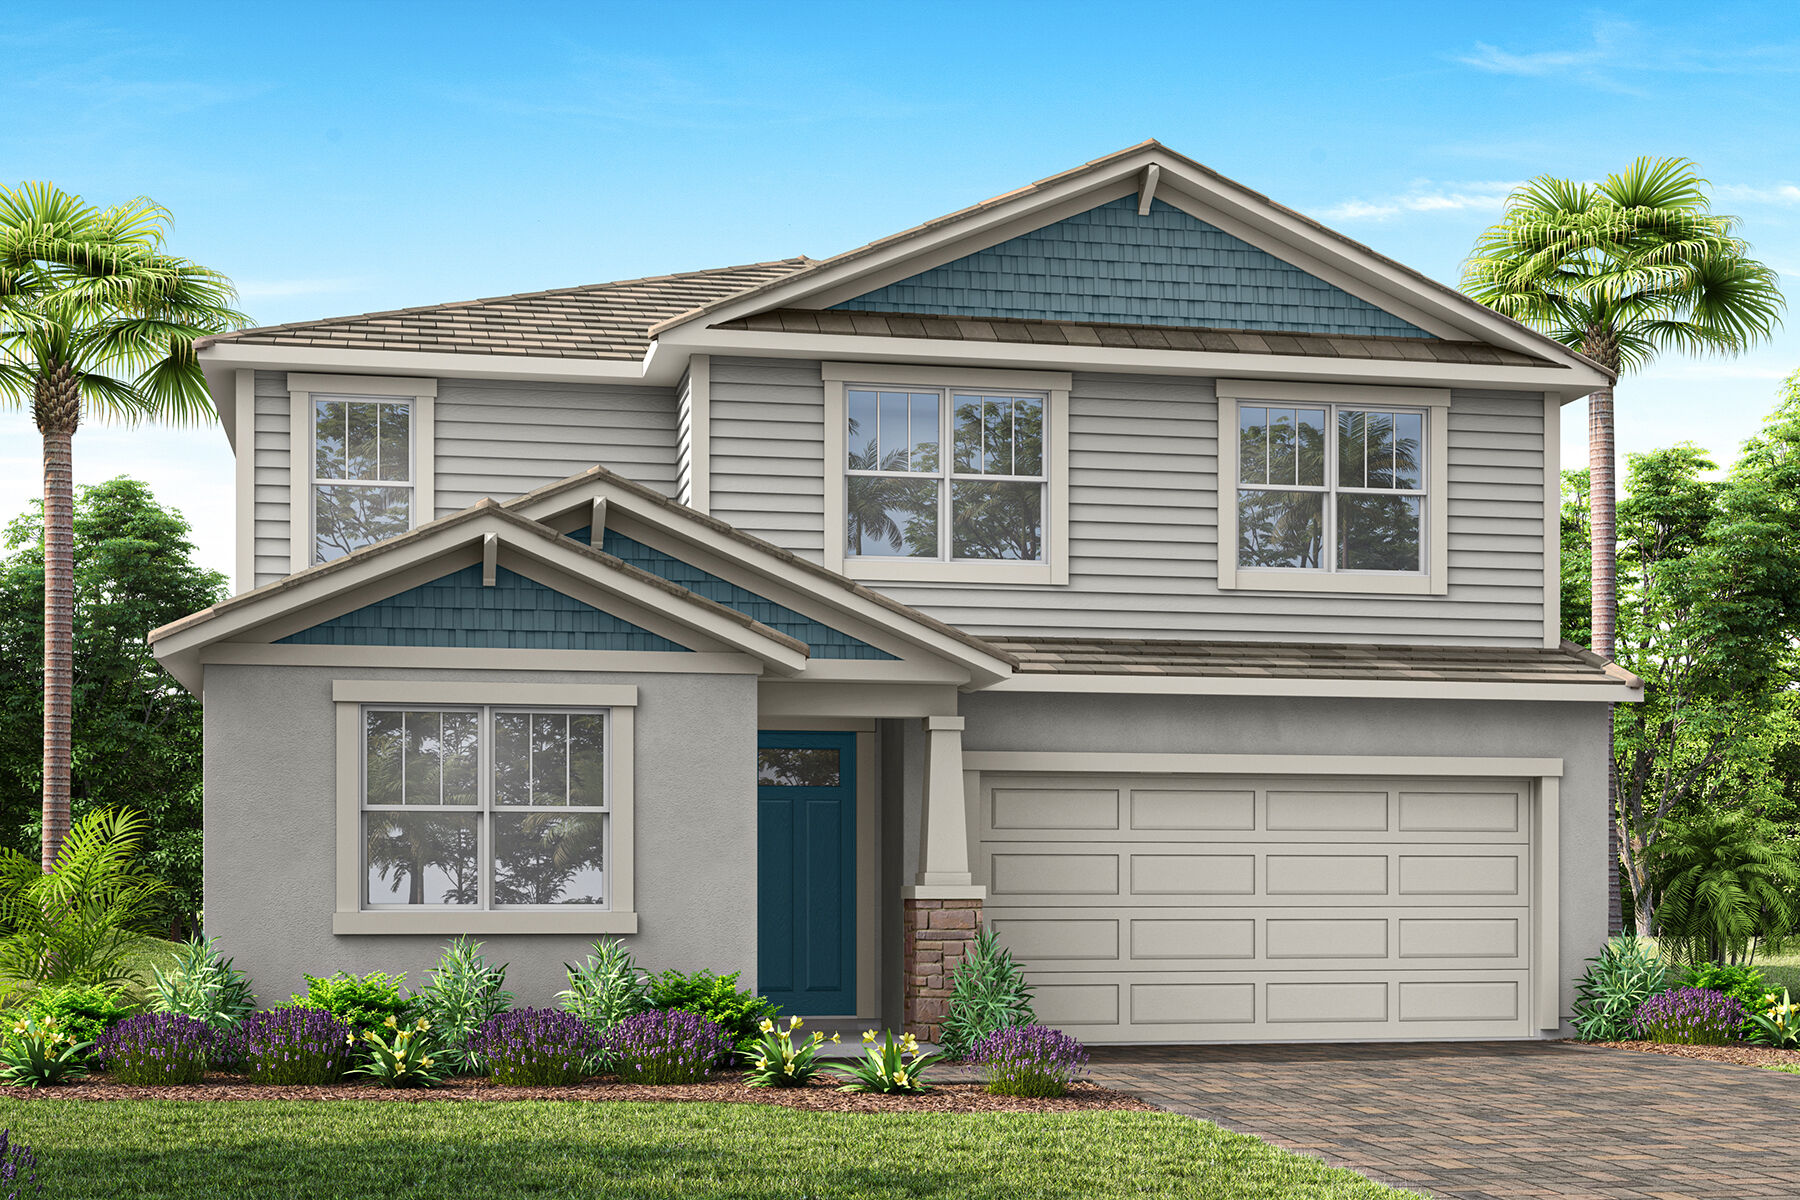 exterior rendering of 2-story home